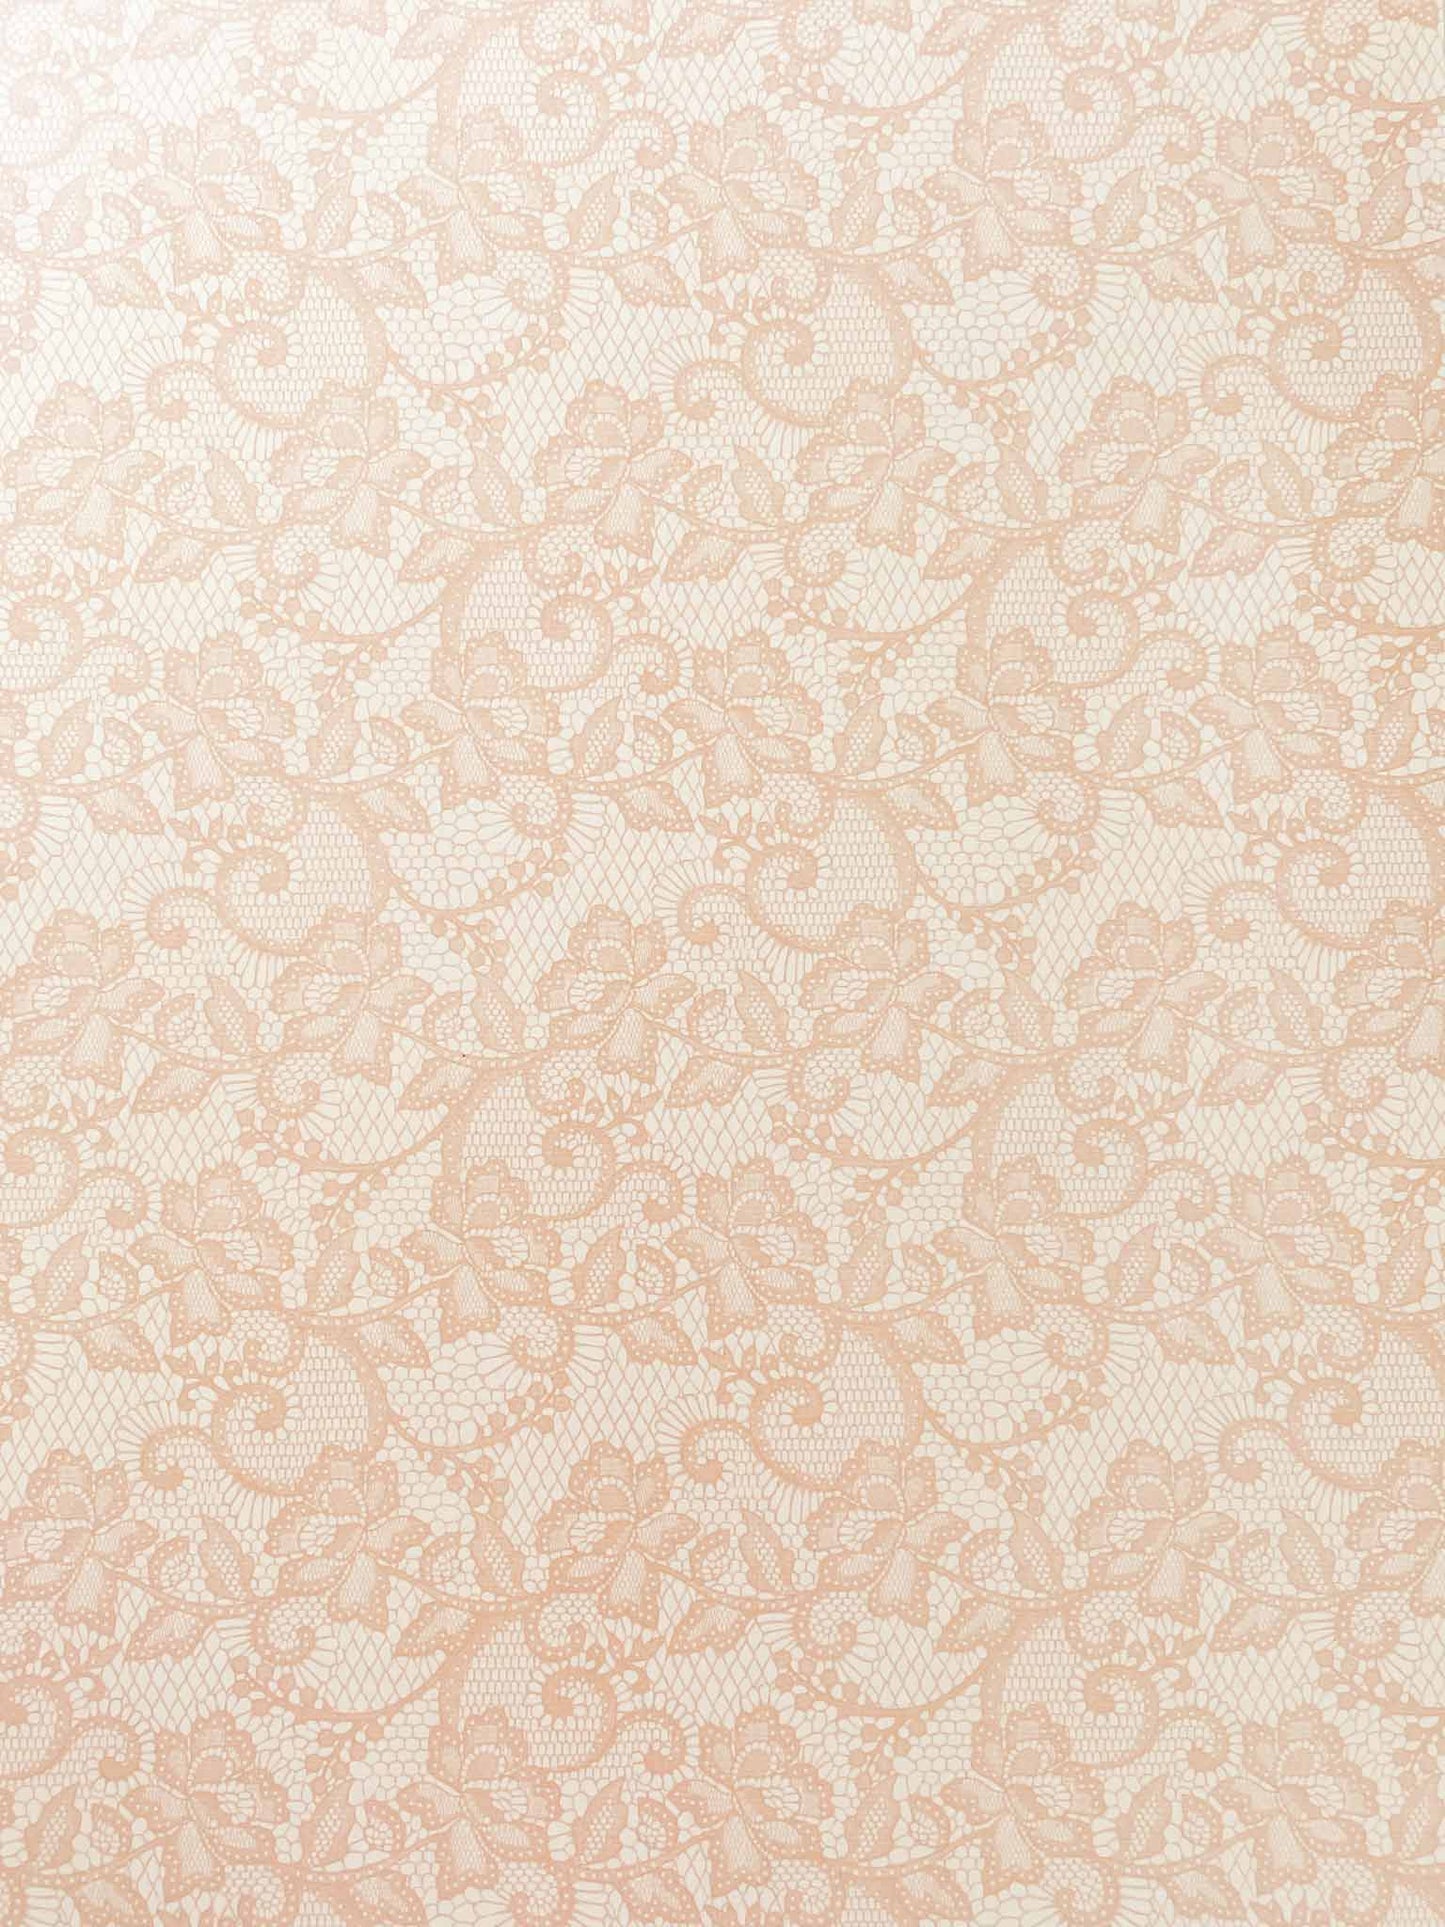 nude-lace-pattern-paper